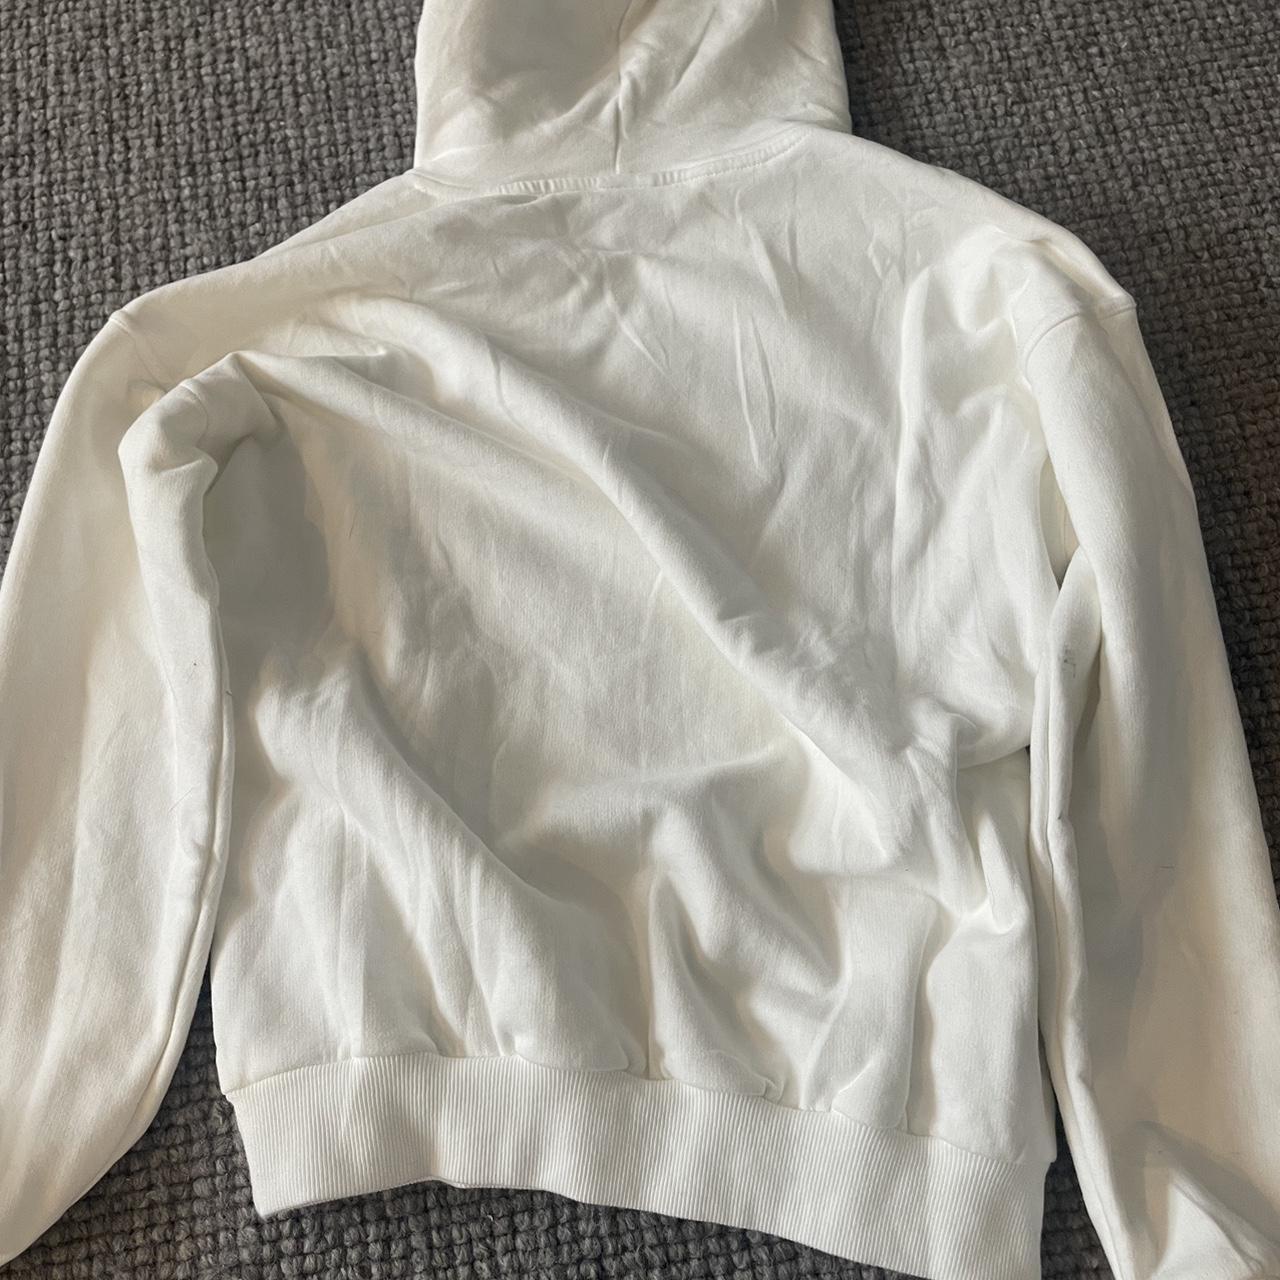 Saint Paradiso hoodie. Tags removed and washed but... - Depop